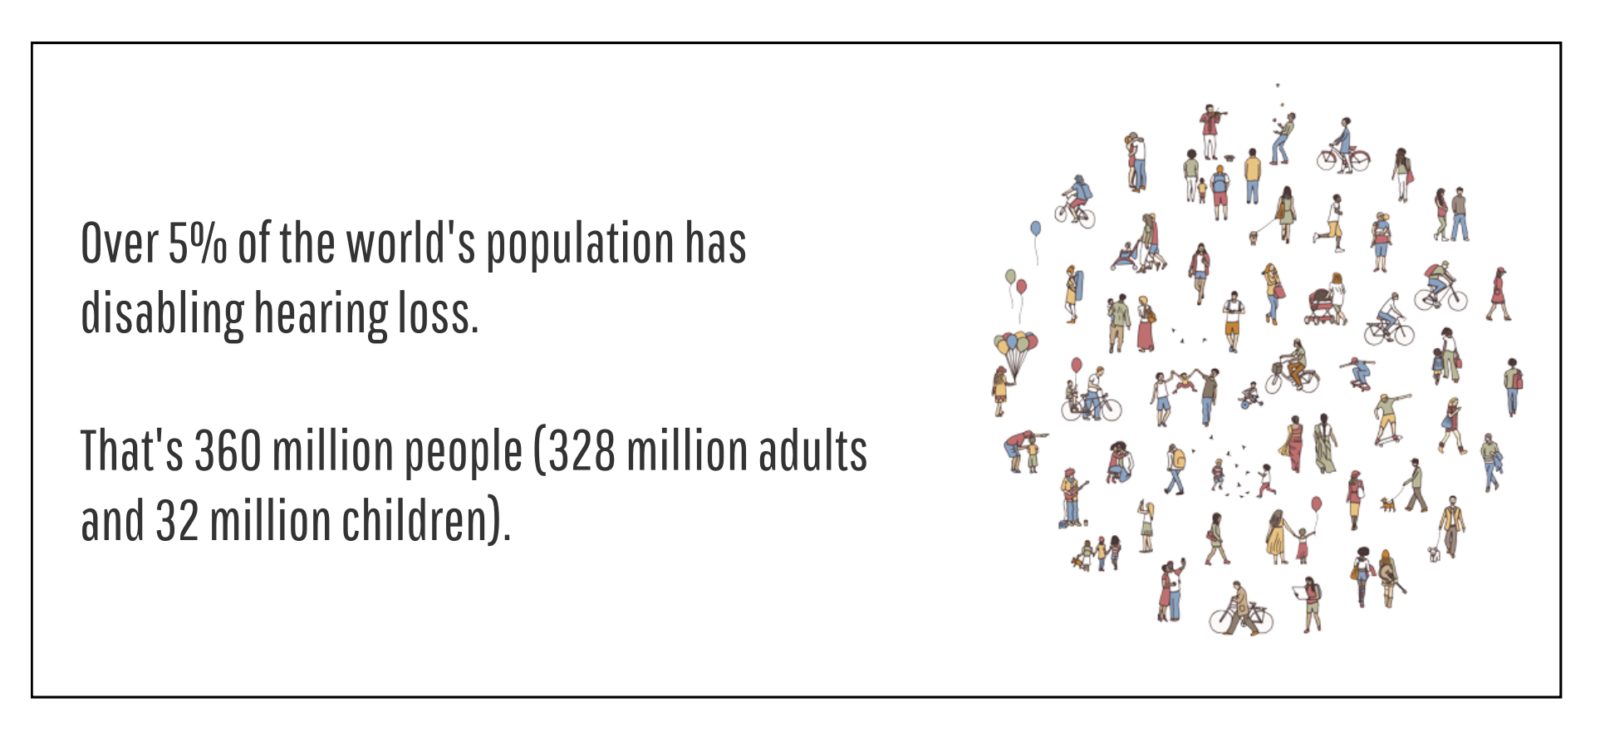 Over 5% of the world's population has disabling hearing loss. That's 360 million people (328 million adults and 32 million children).